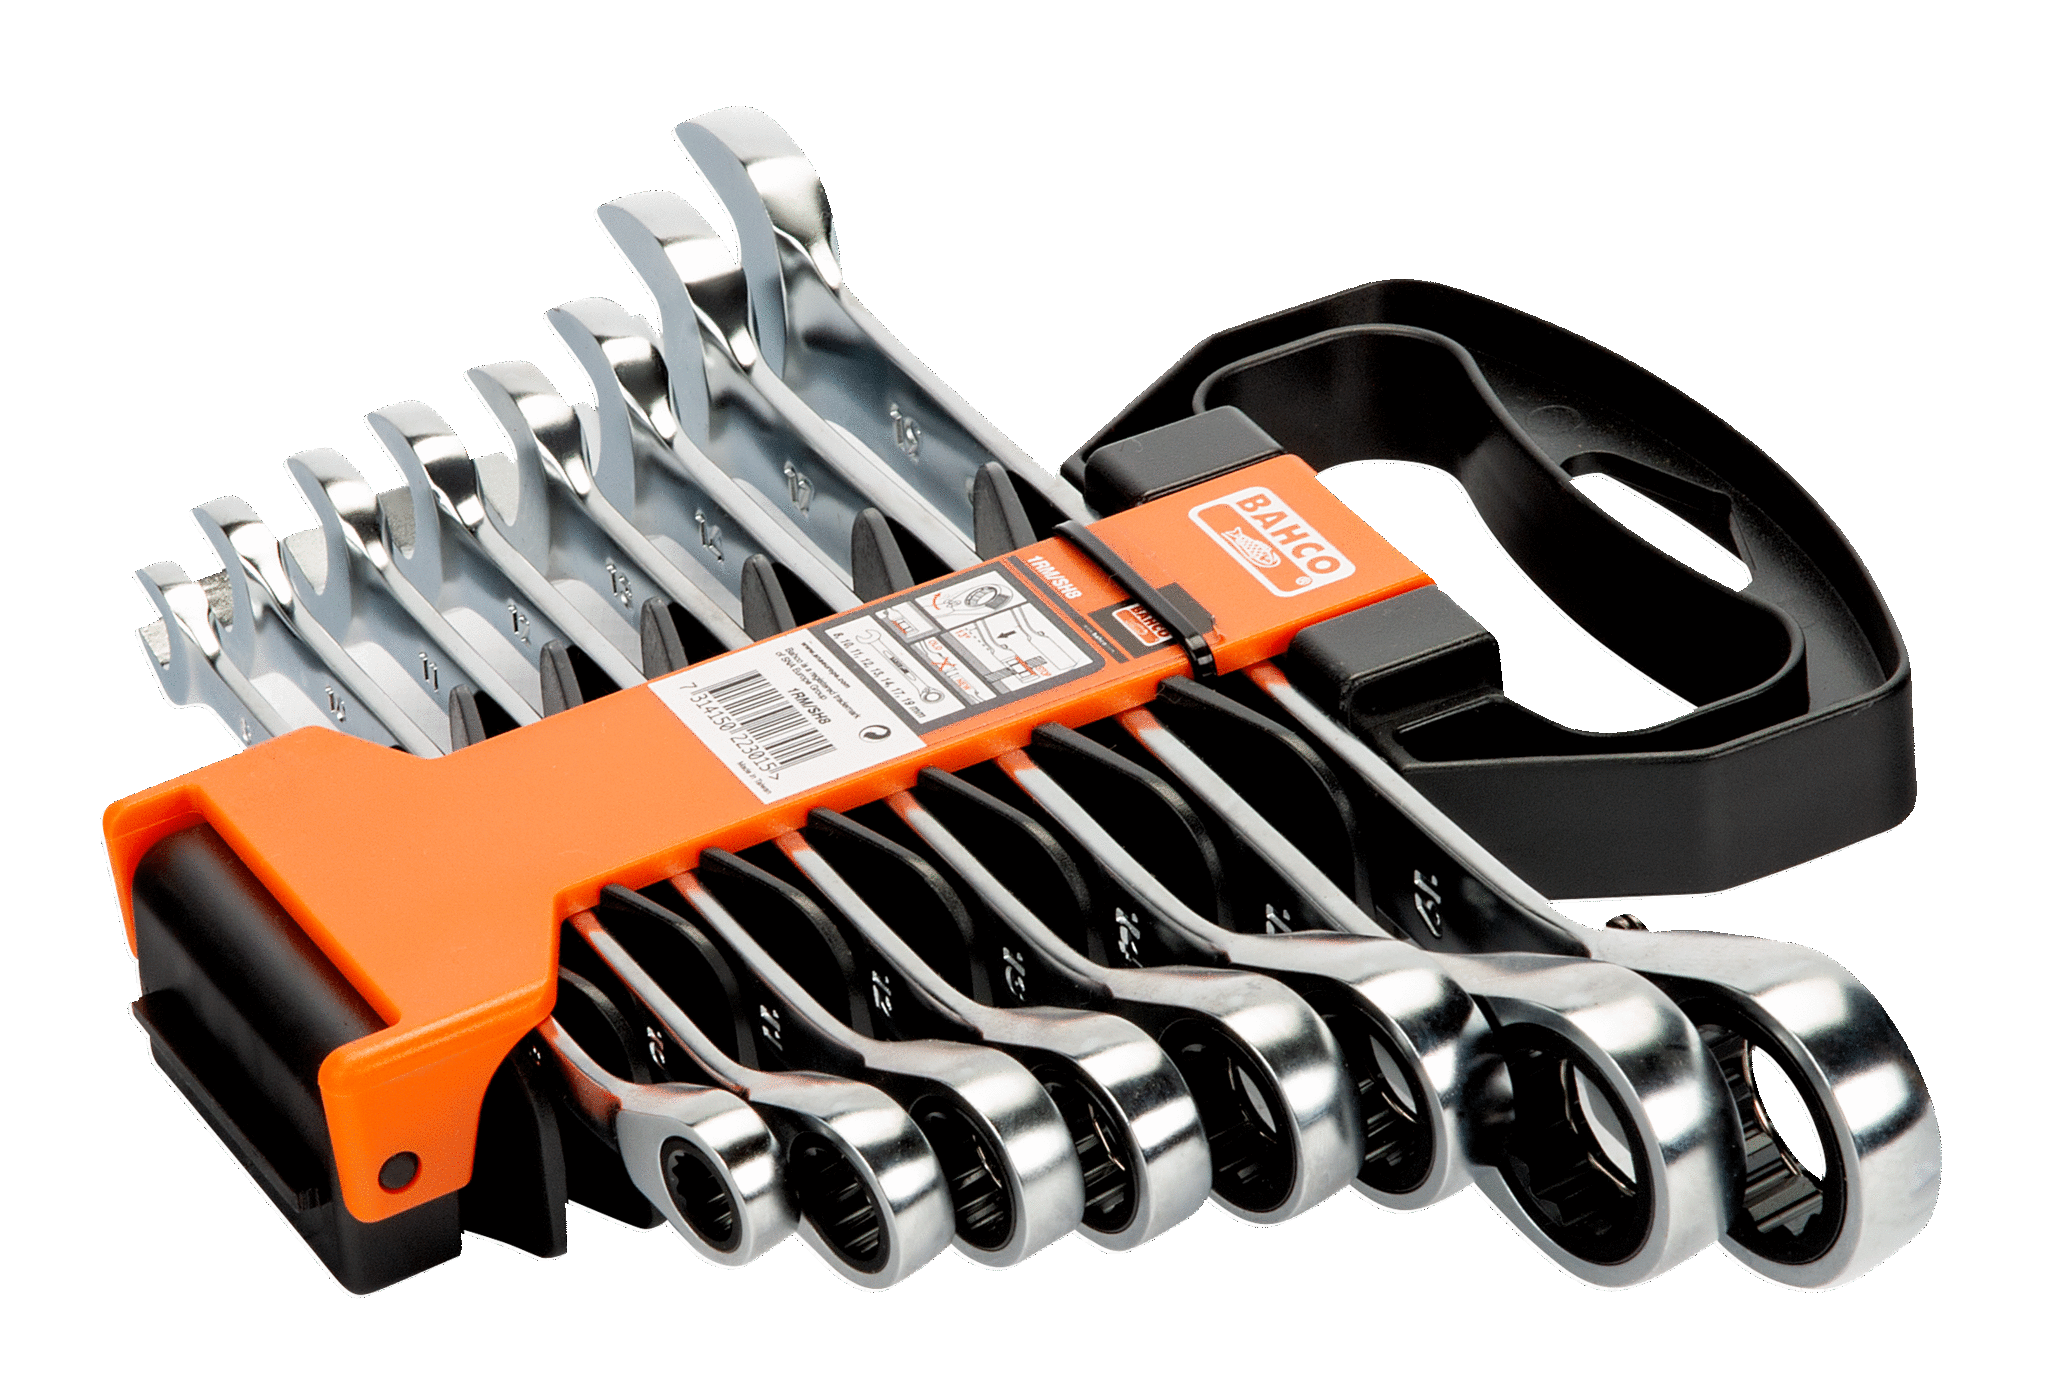 New FACOM France 4pc Open End METRIC  Wrench Set and 9pc  Hex Key Set Metric. 